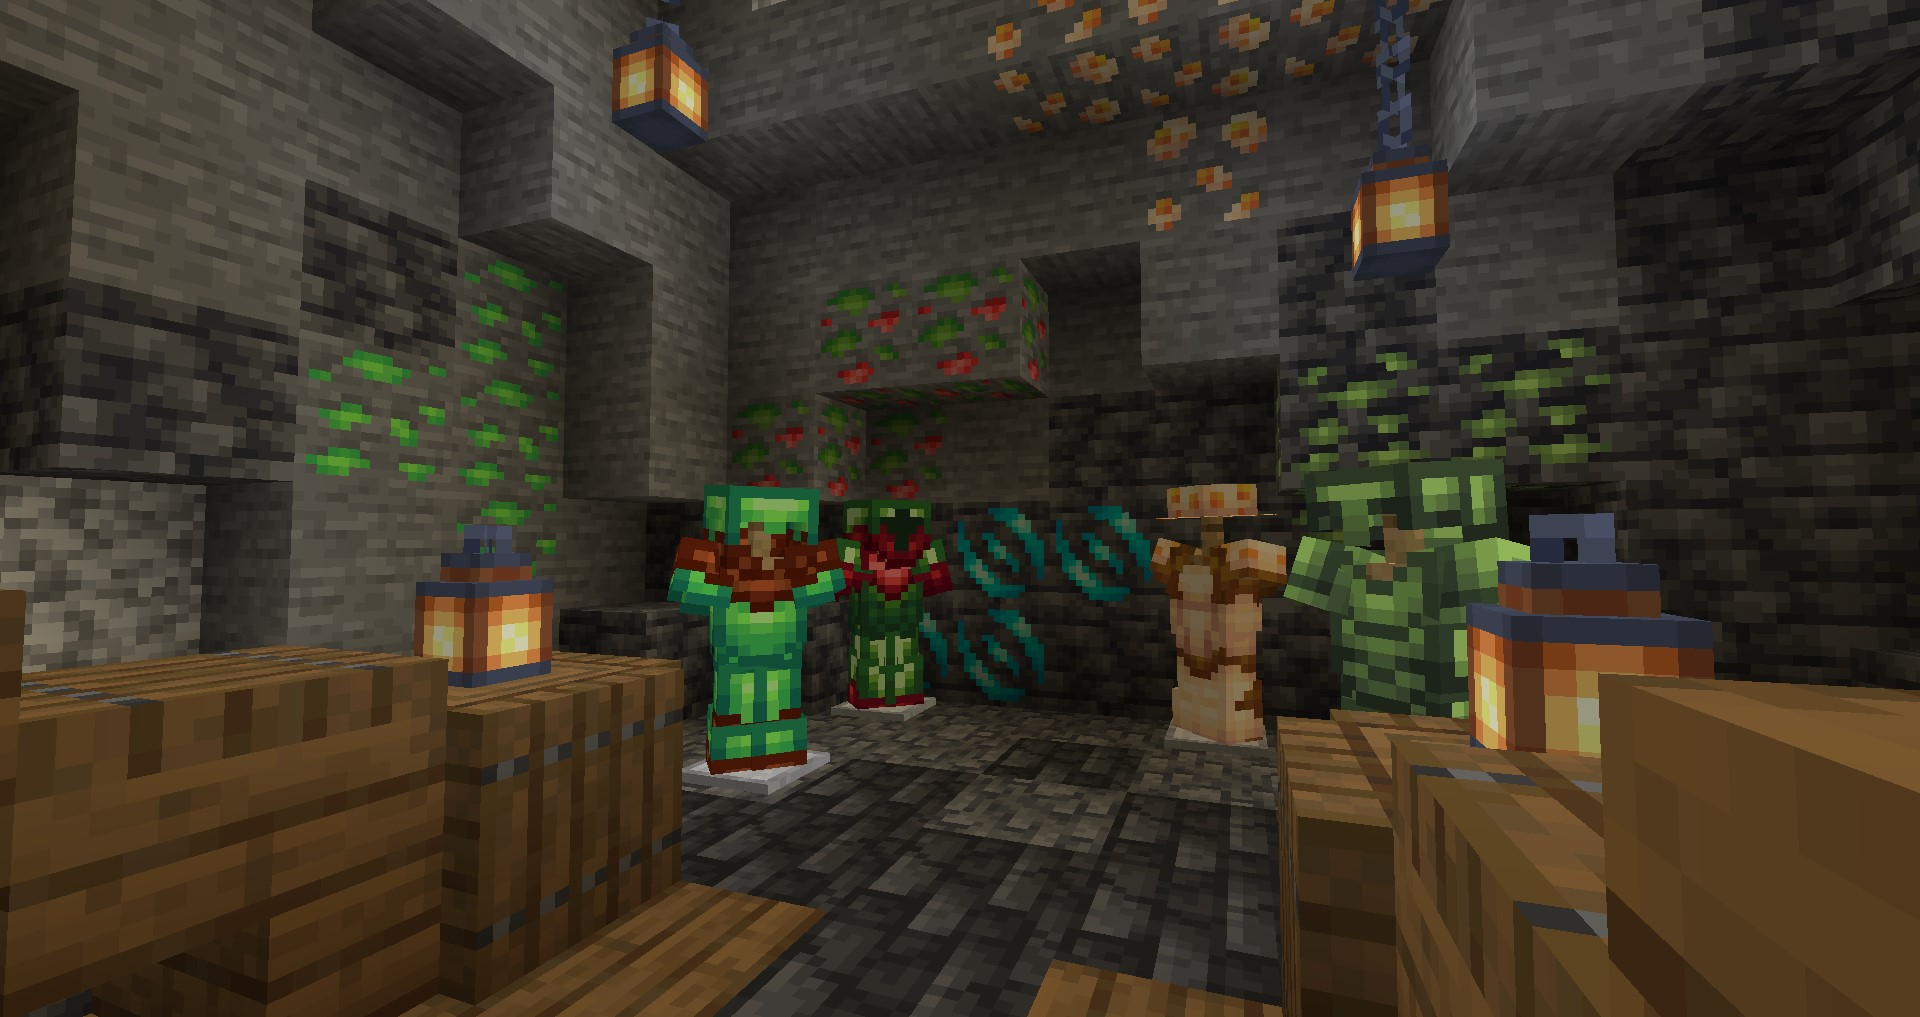 New ores along with their armors